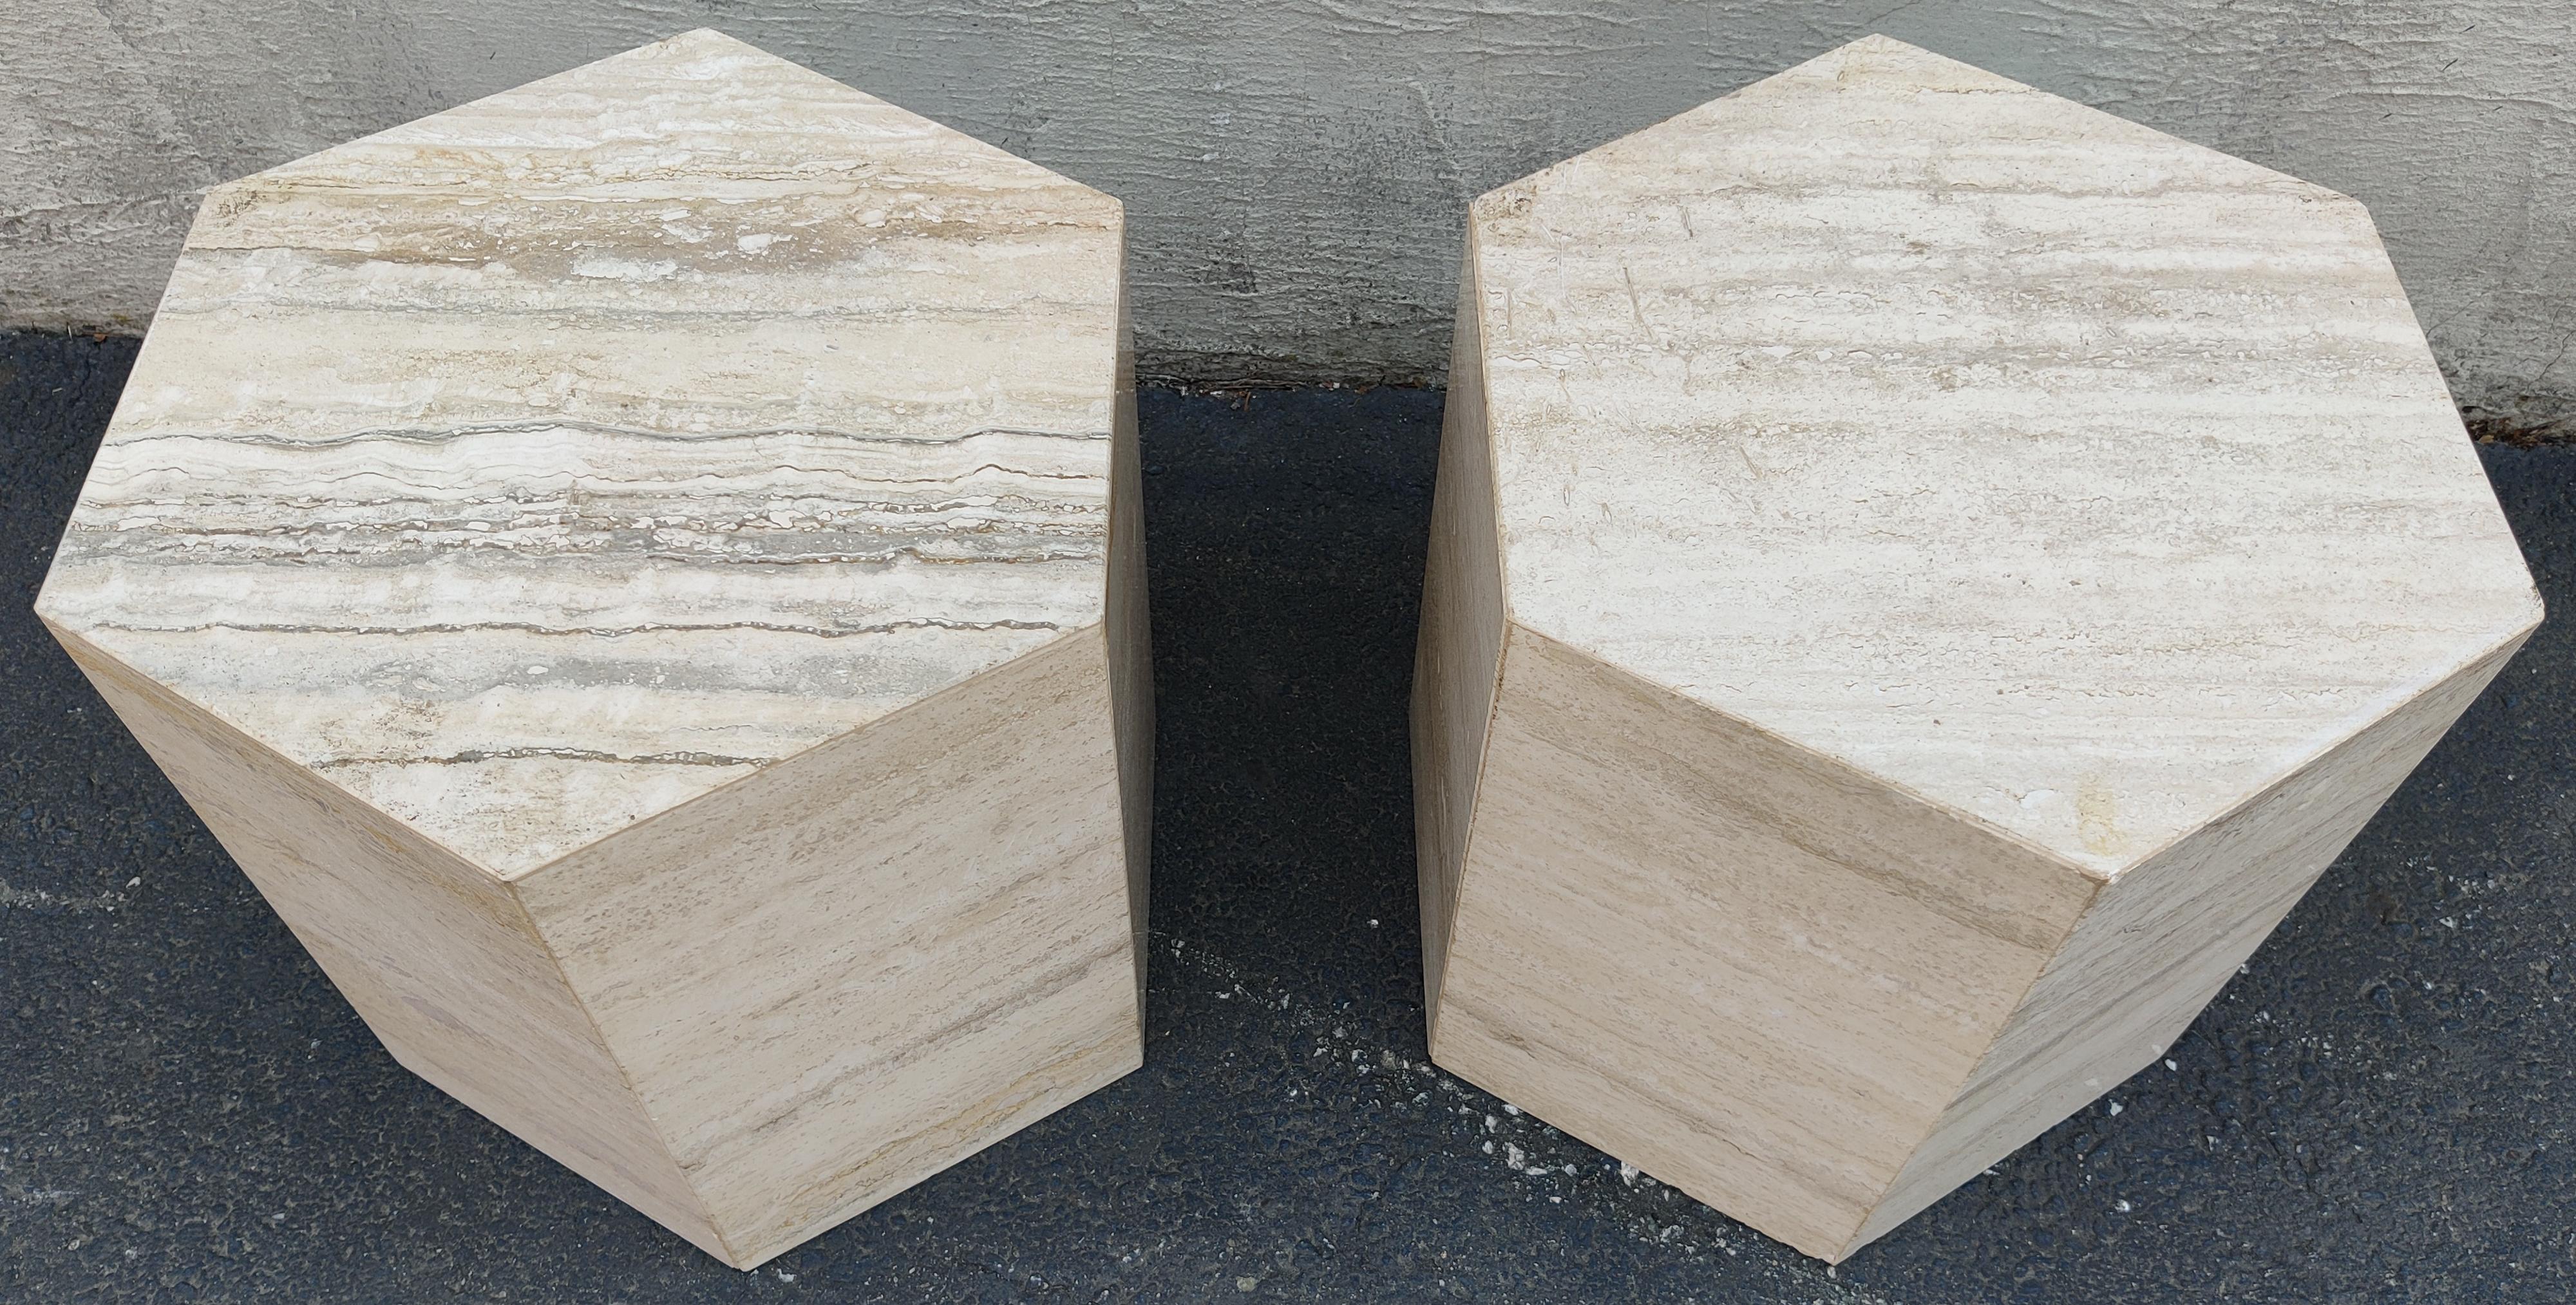 Pair of Italian travertine marble haxagonal side tables or pedestals. The polished travertine is beige and cream colored with beautiful variation. Notice in some areas the grain develops a red or rust-colored hue, which adds to its beauty and